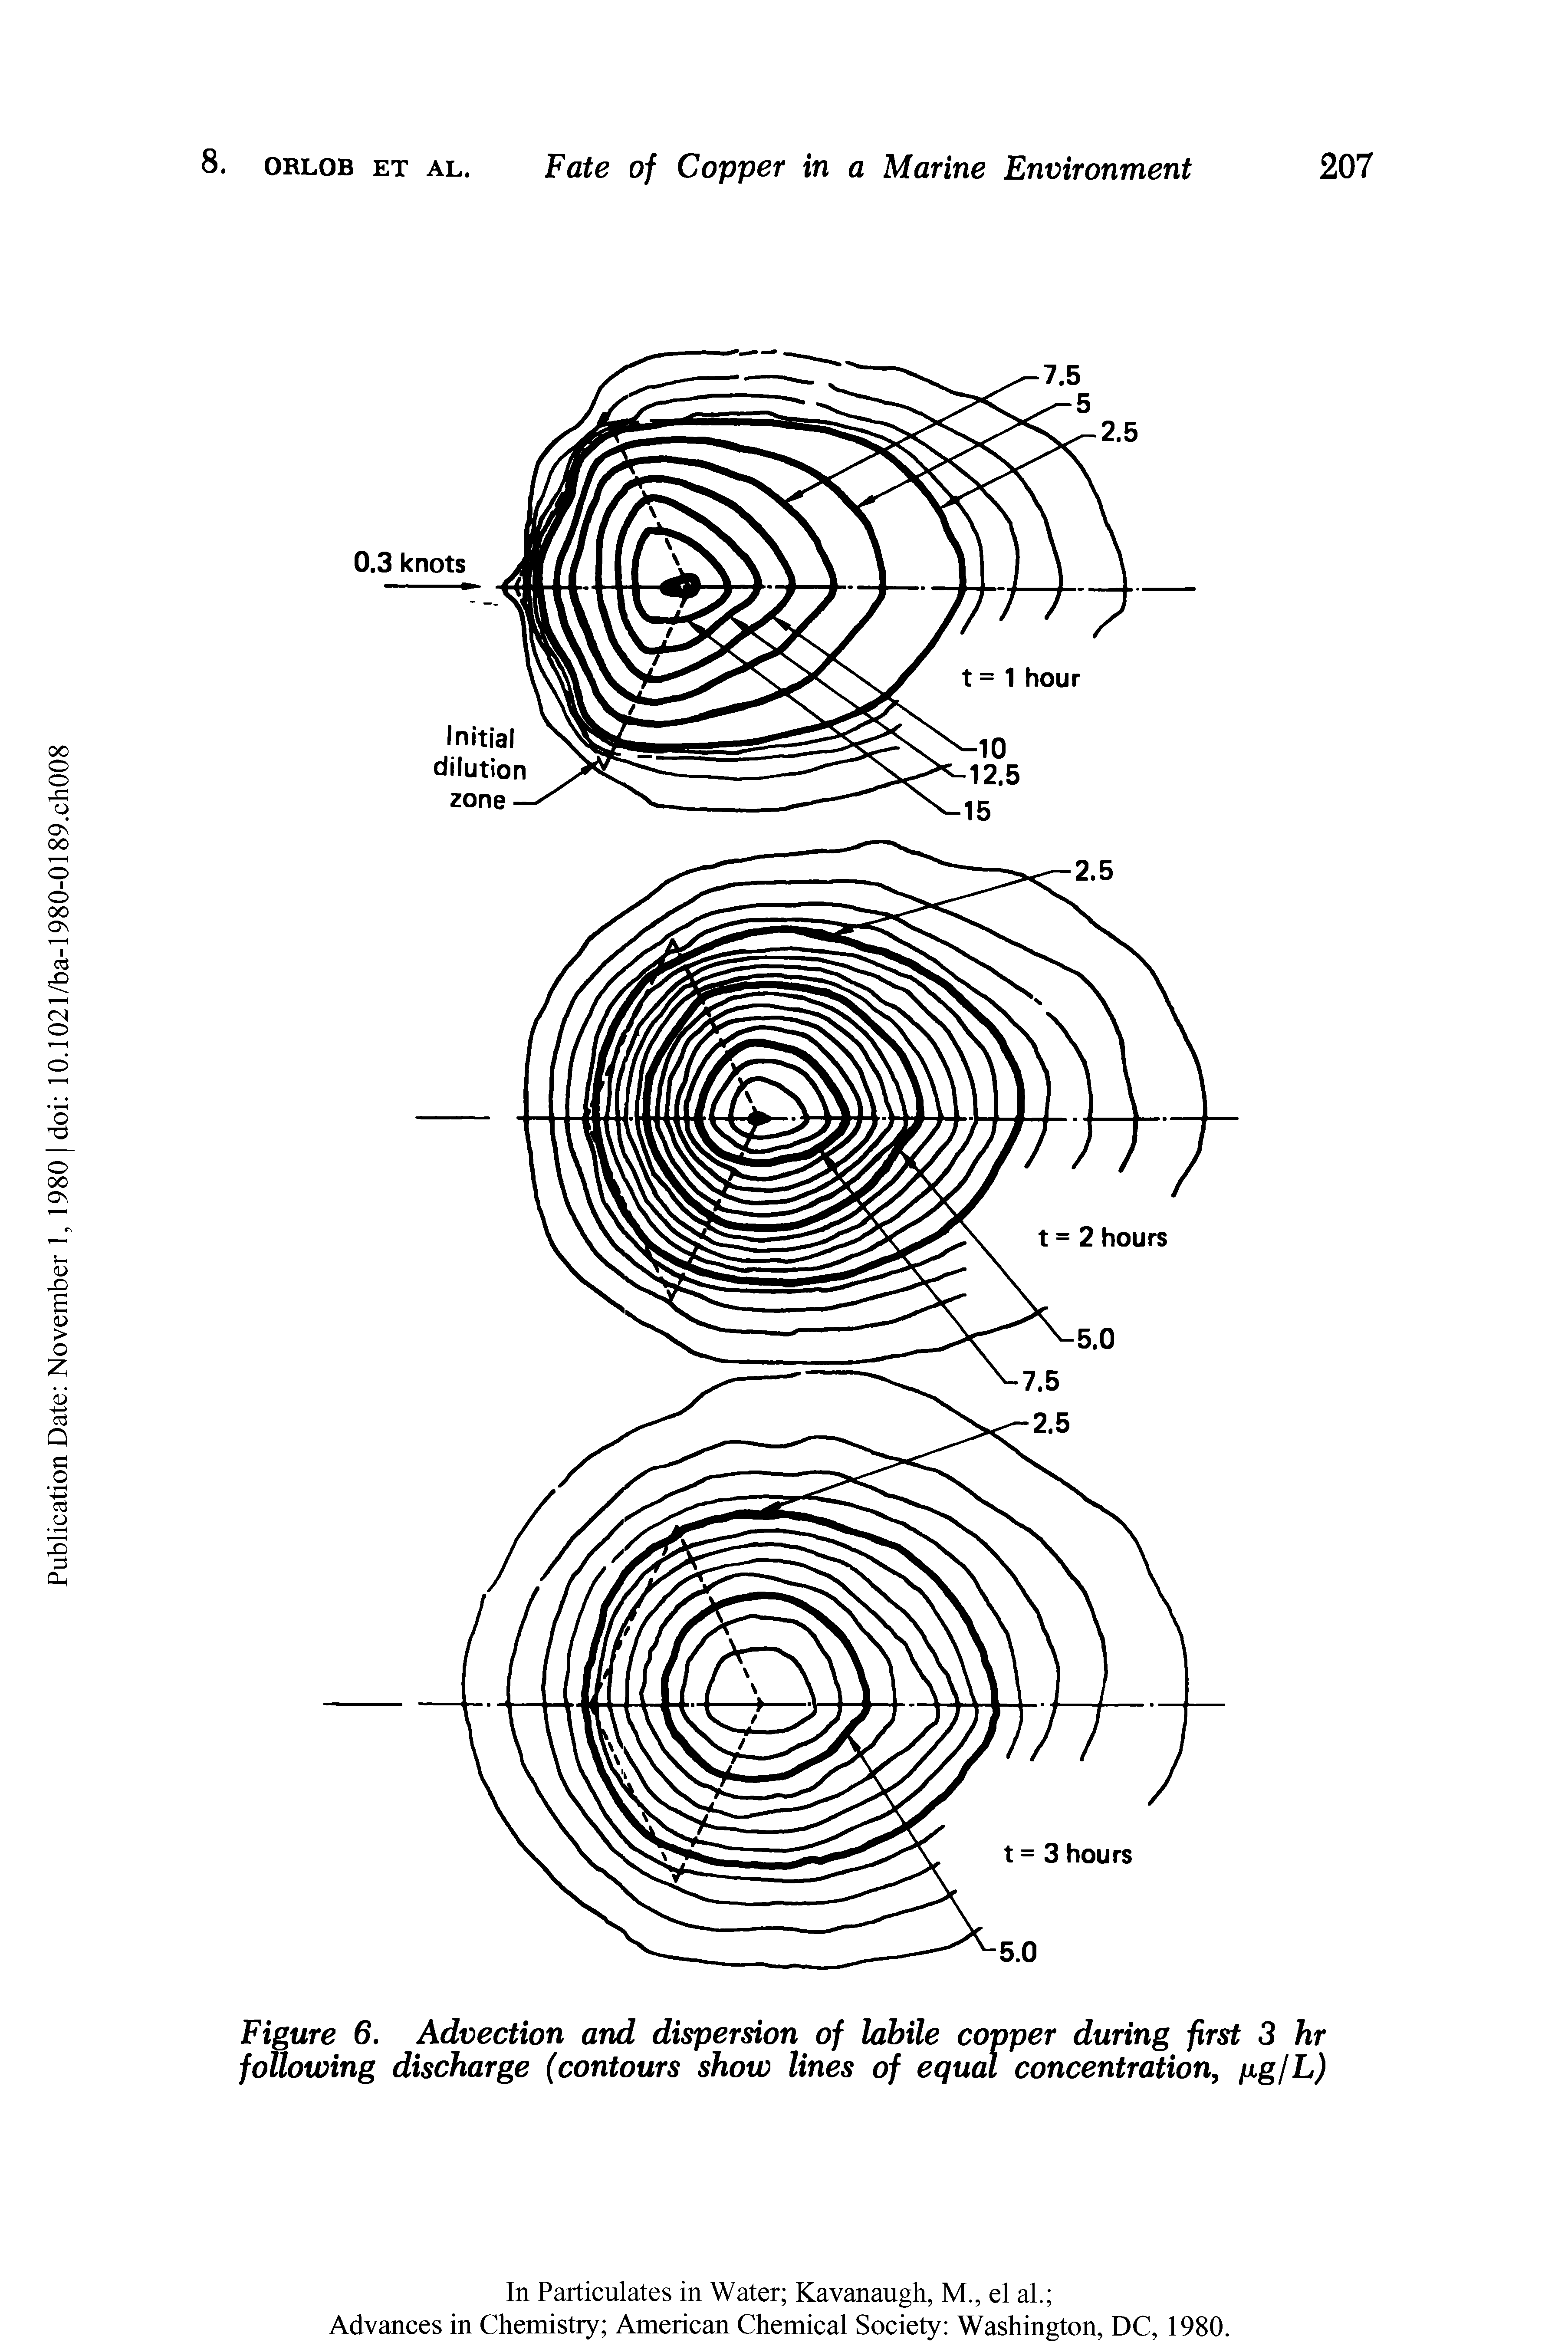 Figure 6. Advection and dispersion of labile copper during first 3 hr following discharge (contours show lines of equal concentration, figlL)...